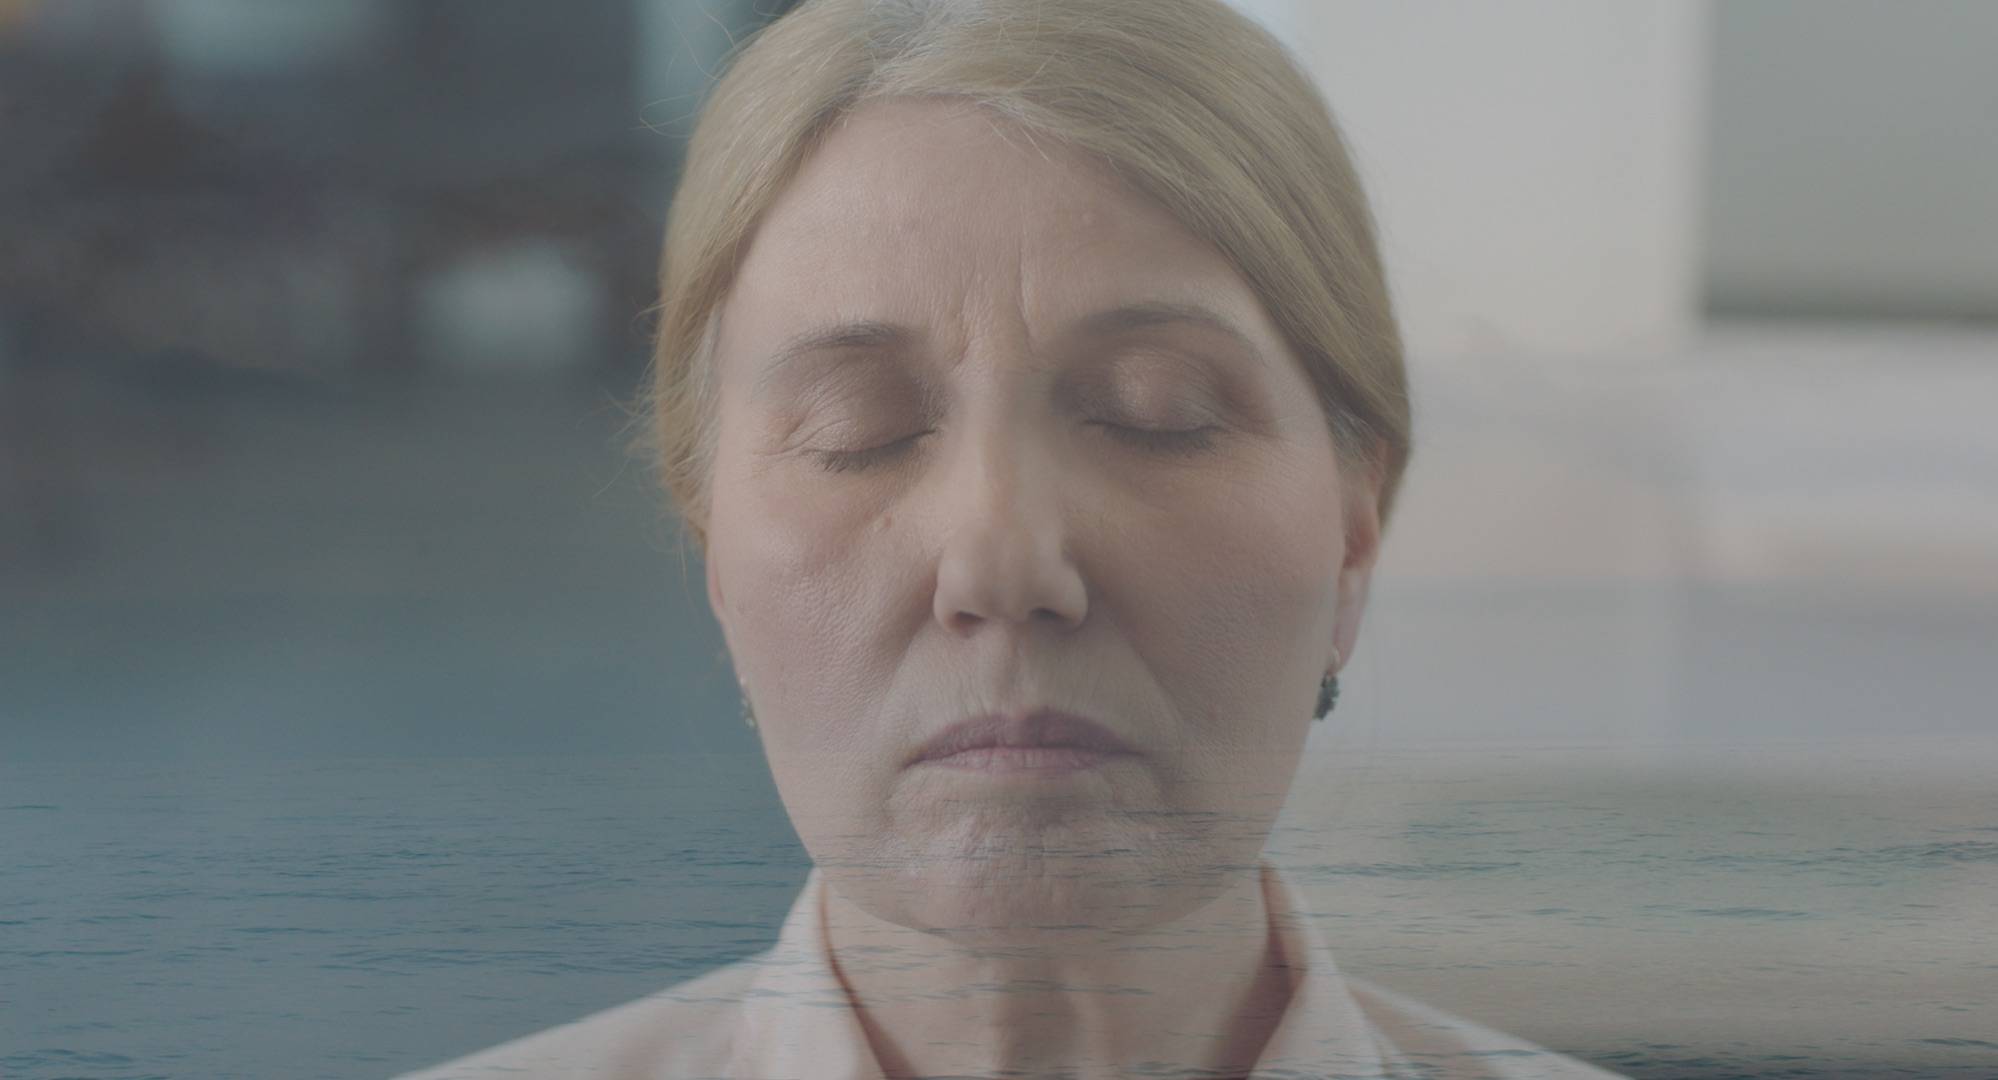 Kaltrina Krasniqi won TIFF’s Tokyo Grand Prix award for “Vera Dreams of the Sea,” a film about a middle-aged sign language interpreter who quietly rebels against Kosovo’s patriarchal society. | 